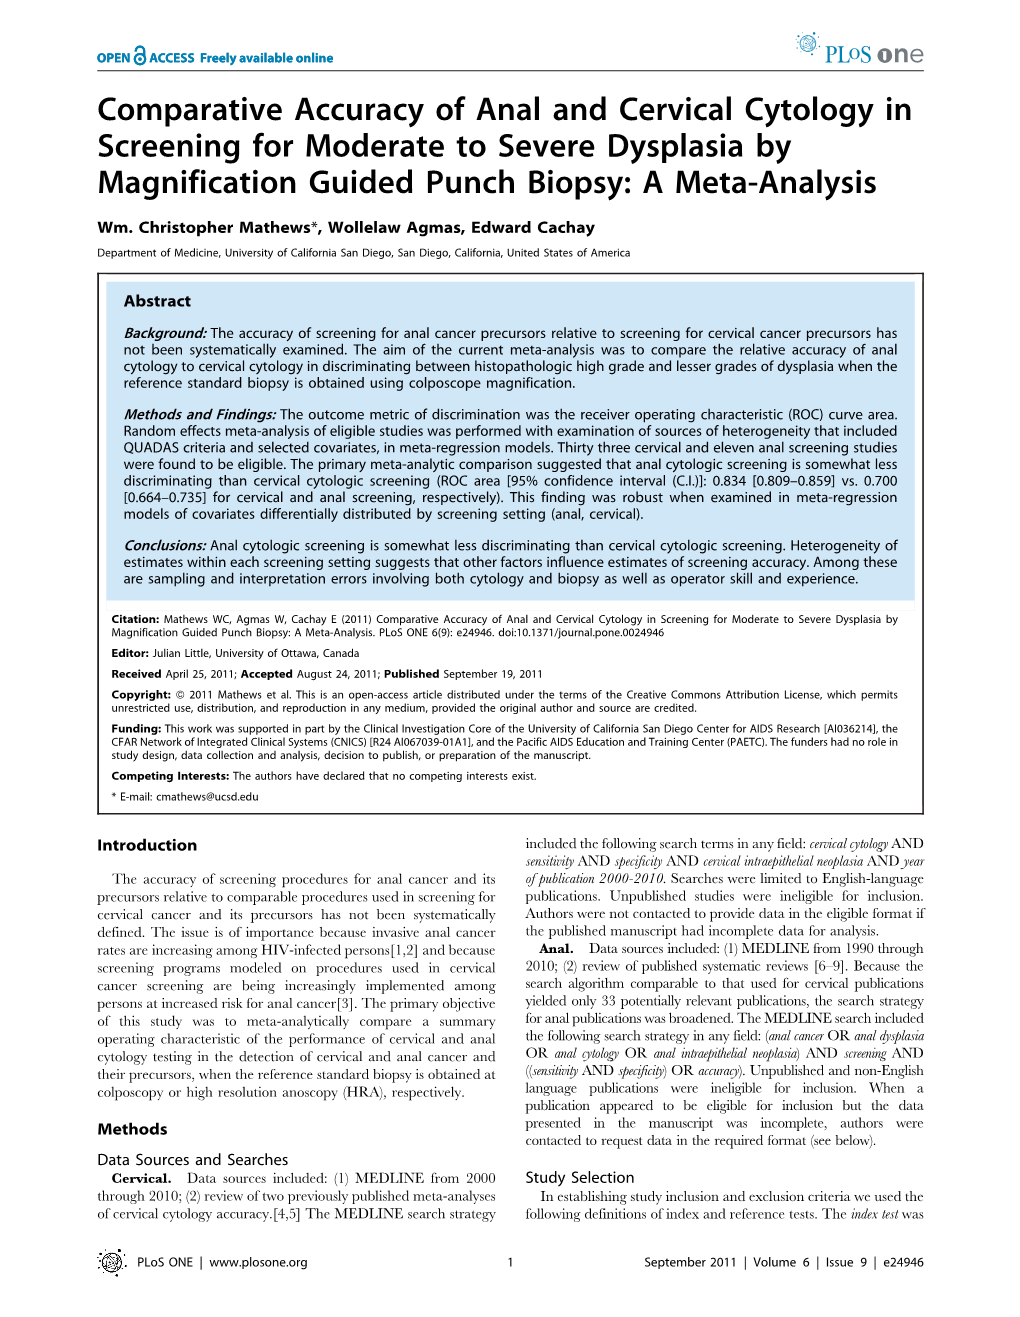 Comparative Accuracy of Anal and Cervical Cytology in Screening for Moderate to Severe Dysplasia by Magnification Guided Punch Biopsy: a Meta-Analysis